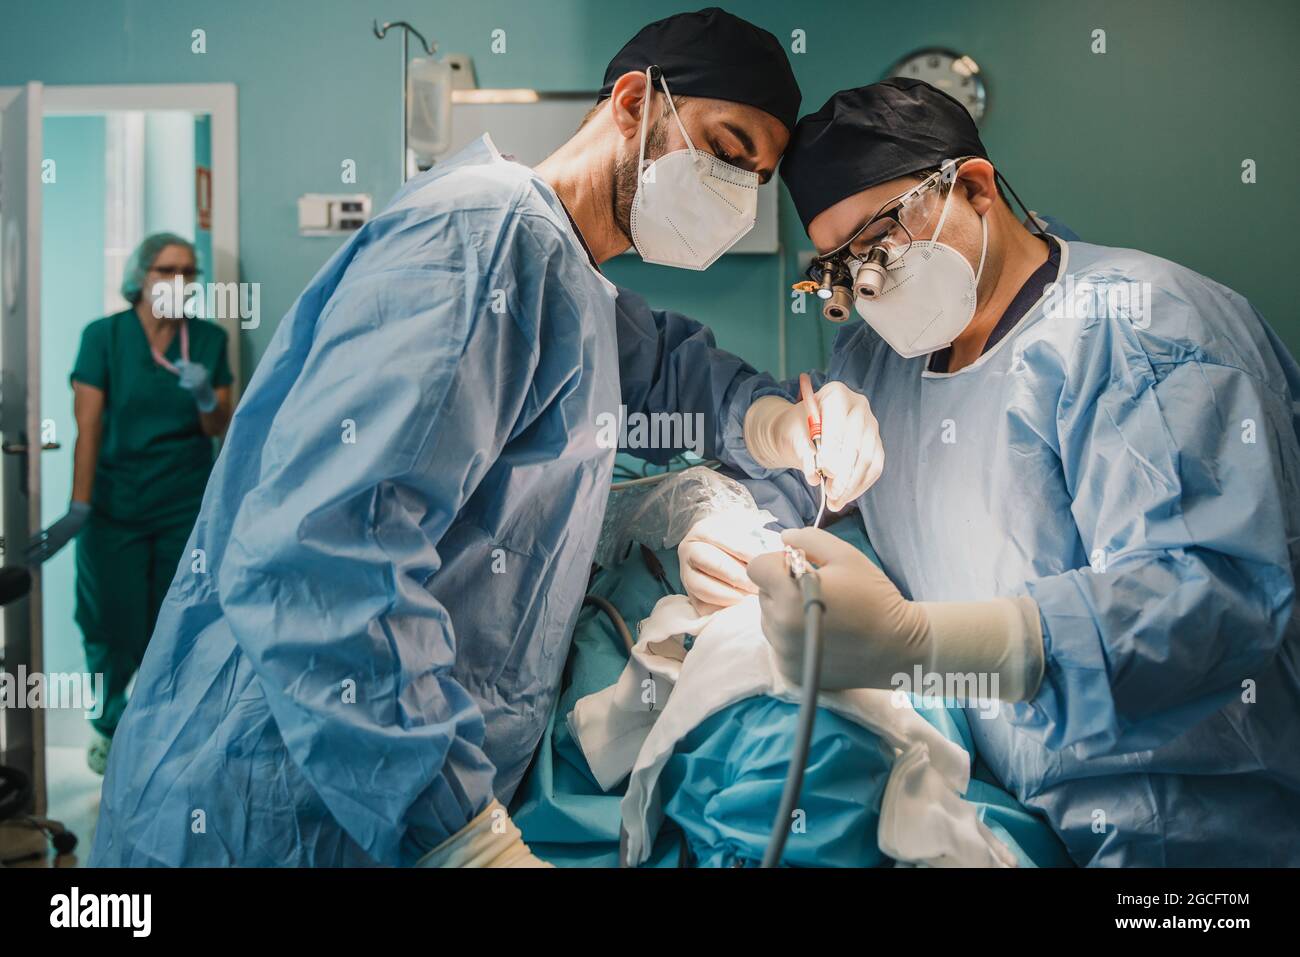 Medical doctors team operating patient in surgical room at hospital - Focus on faces Stock Photo